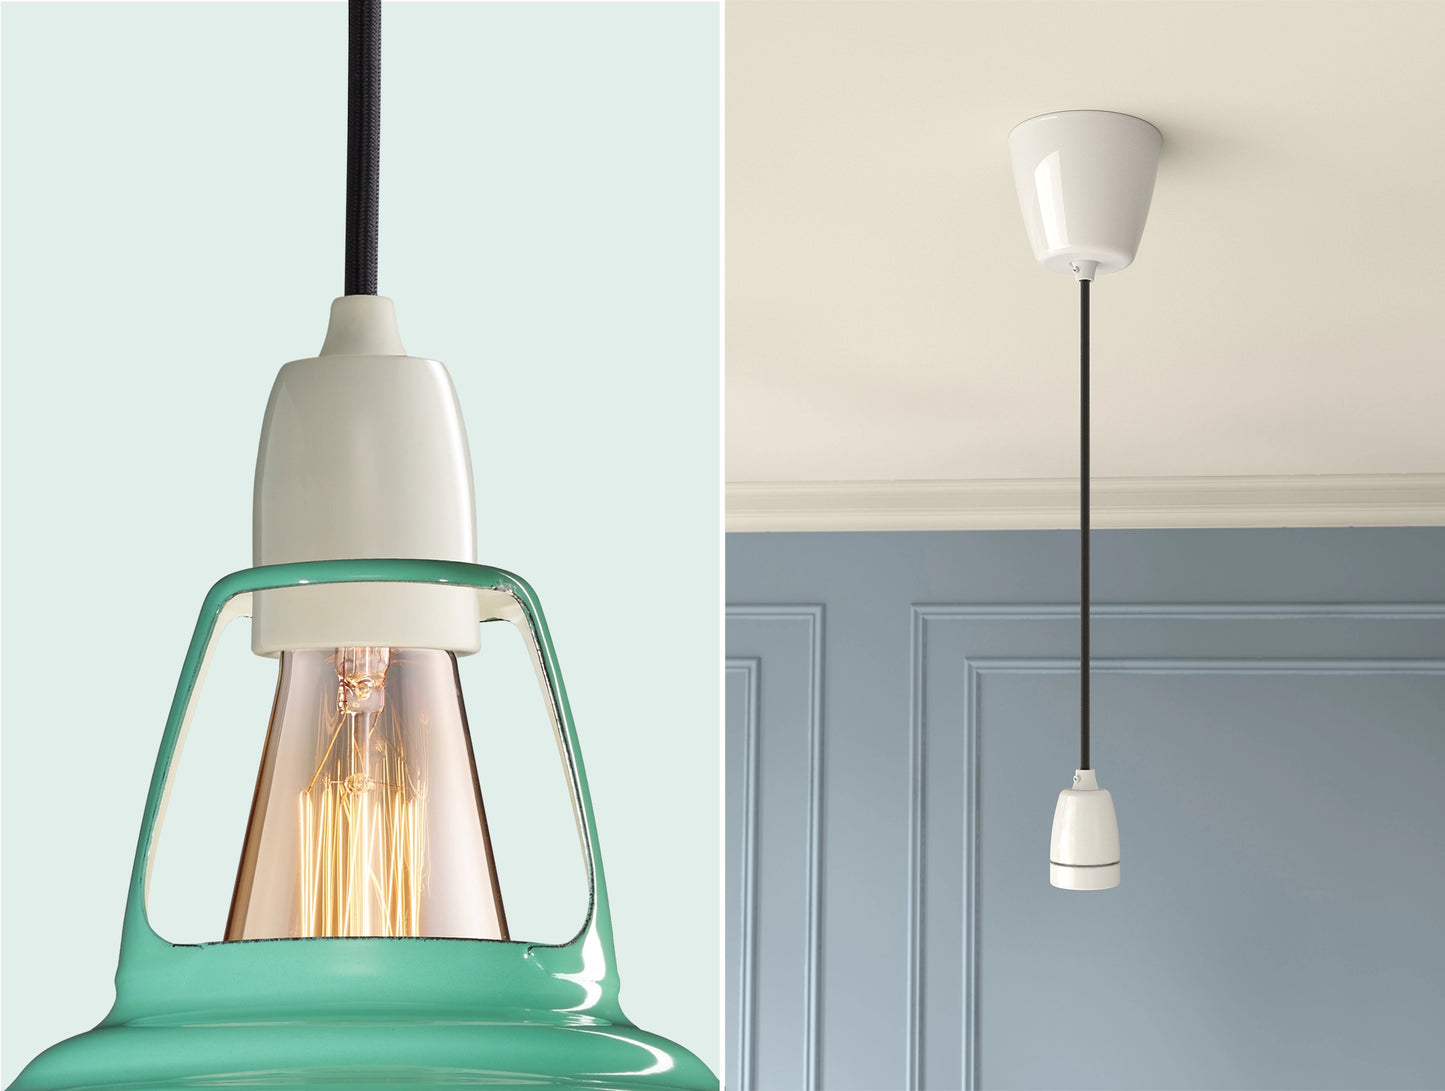 Close up of an E27 Porcelain suspension set on a Fresh Teal lampshade on the left. On the right, an E27 Porcelain pendant set is hanging from the ceiling